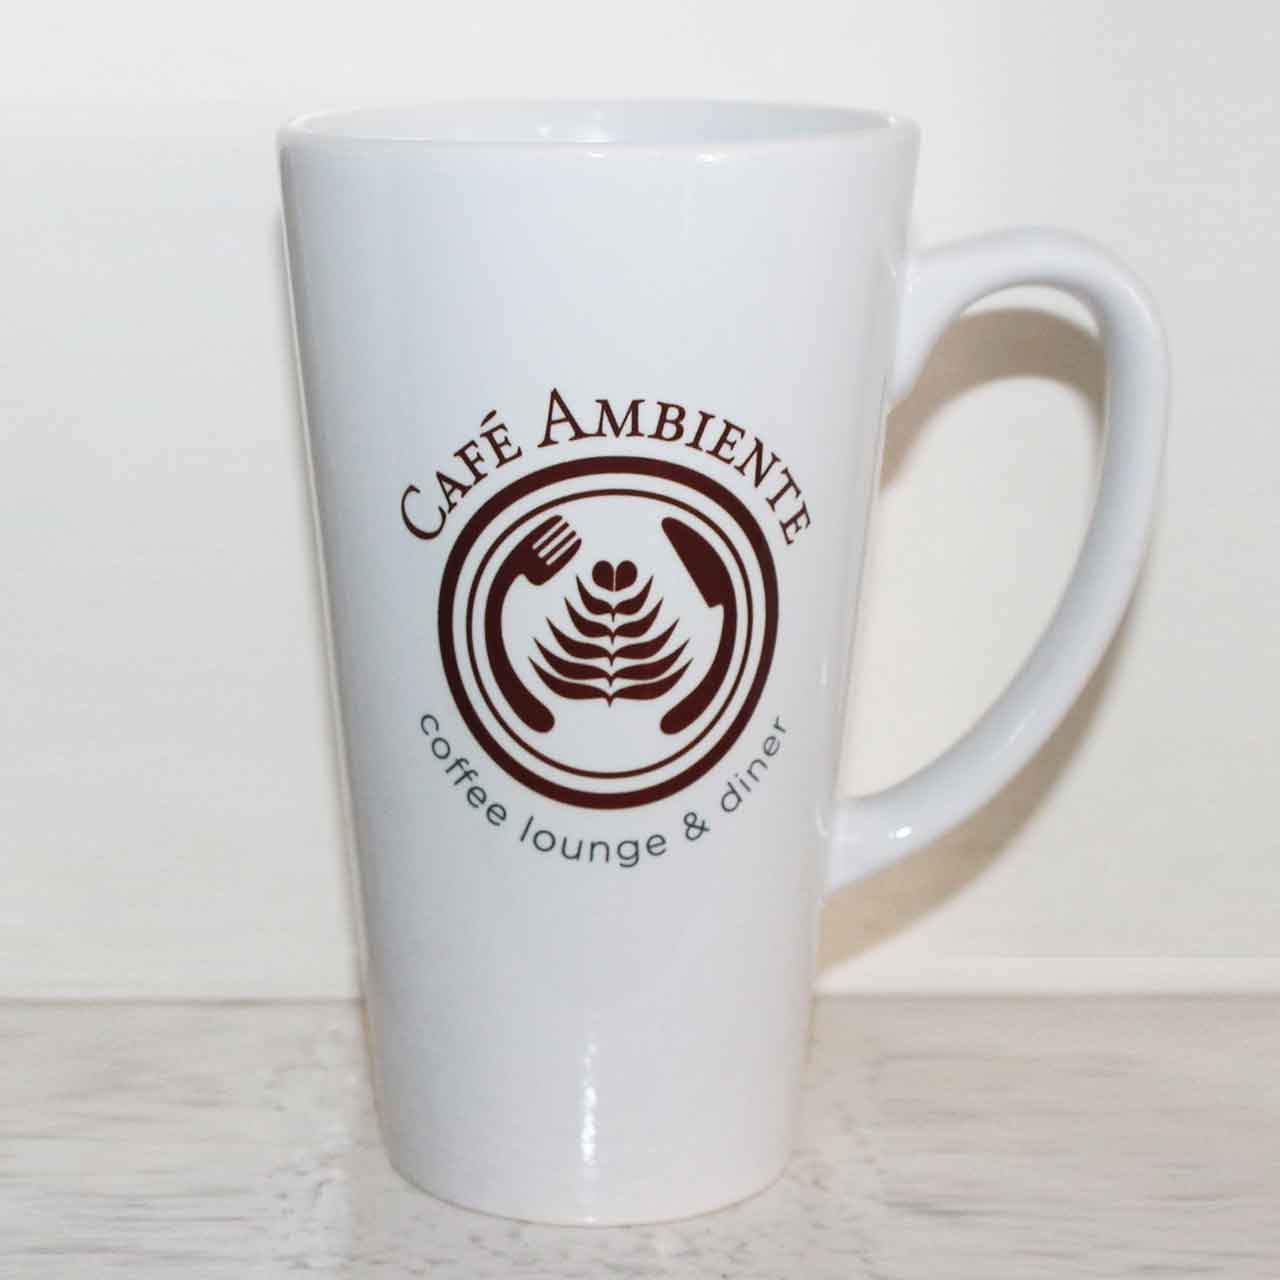 https://www.mypowderblue.com/product-images/gallery-images/large/17-oz-tall-latte-mugs-large-2.jpg